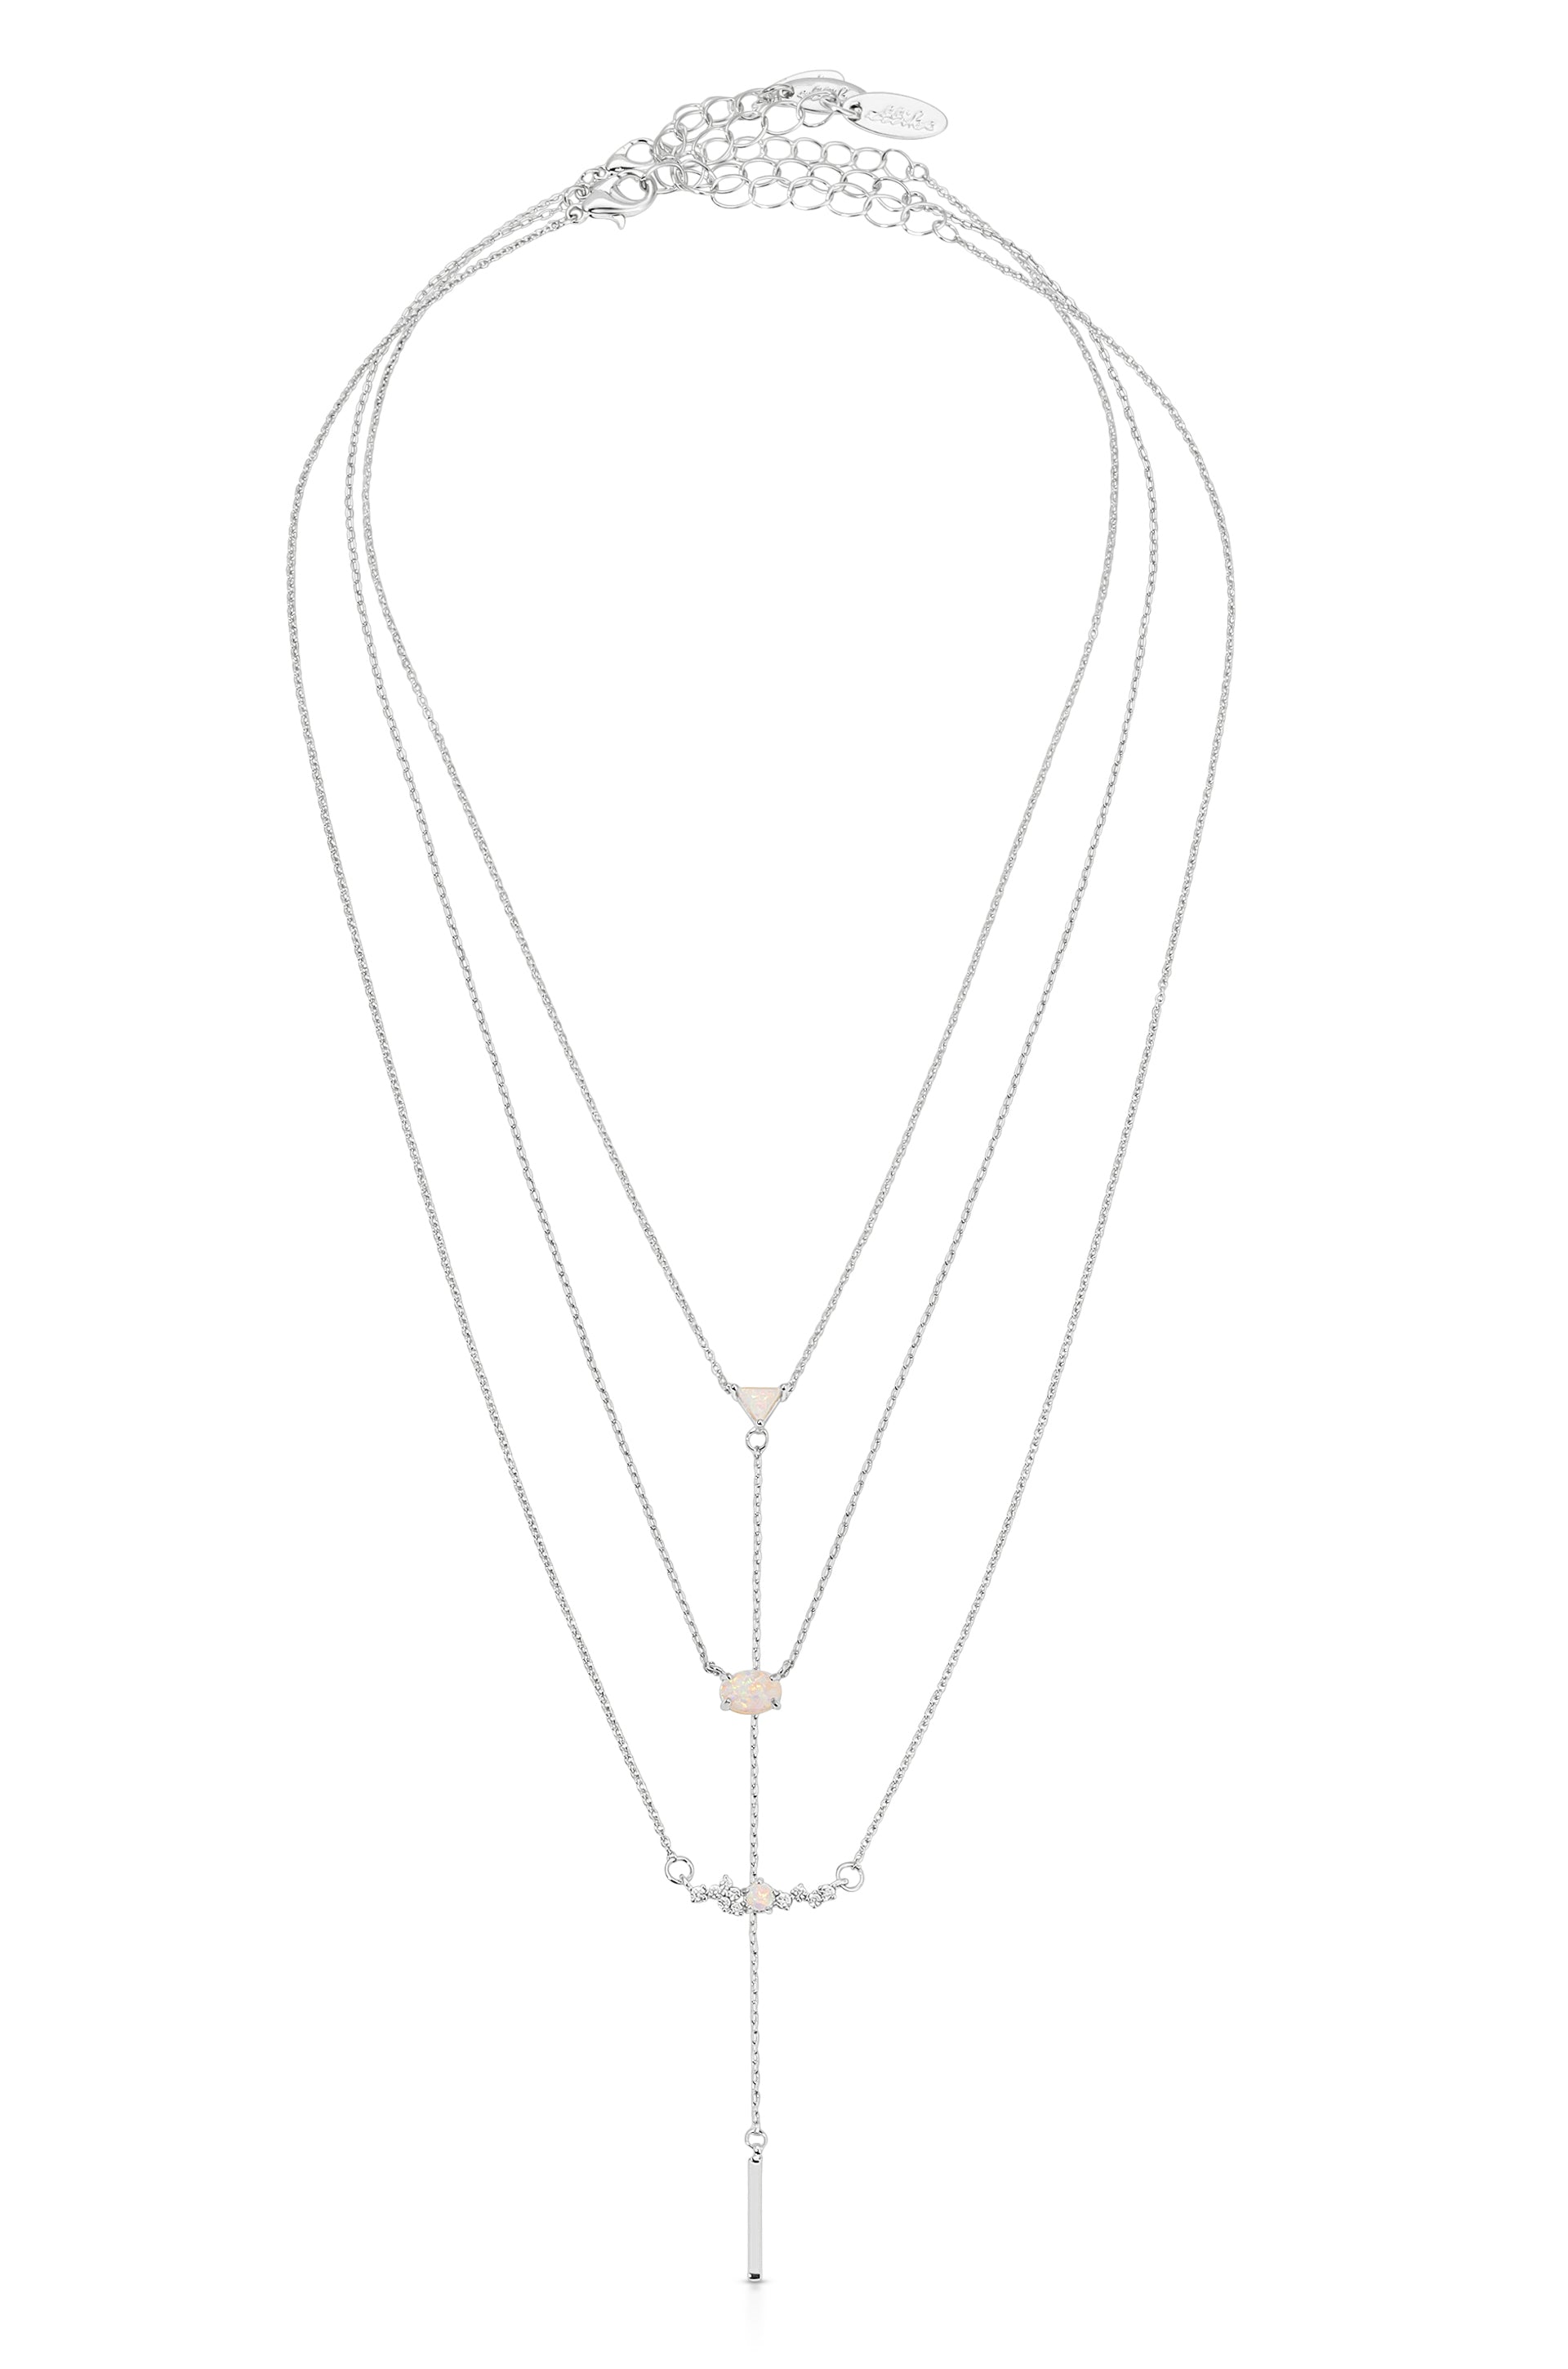 Layered Opal Lariat Necklace Set of 3 in rhodium 